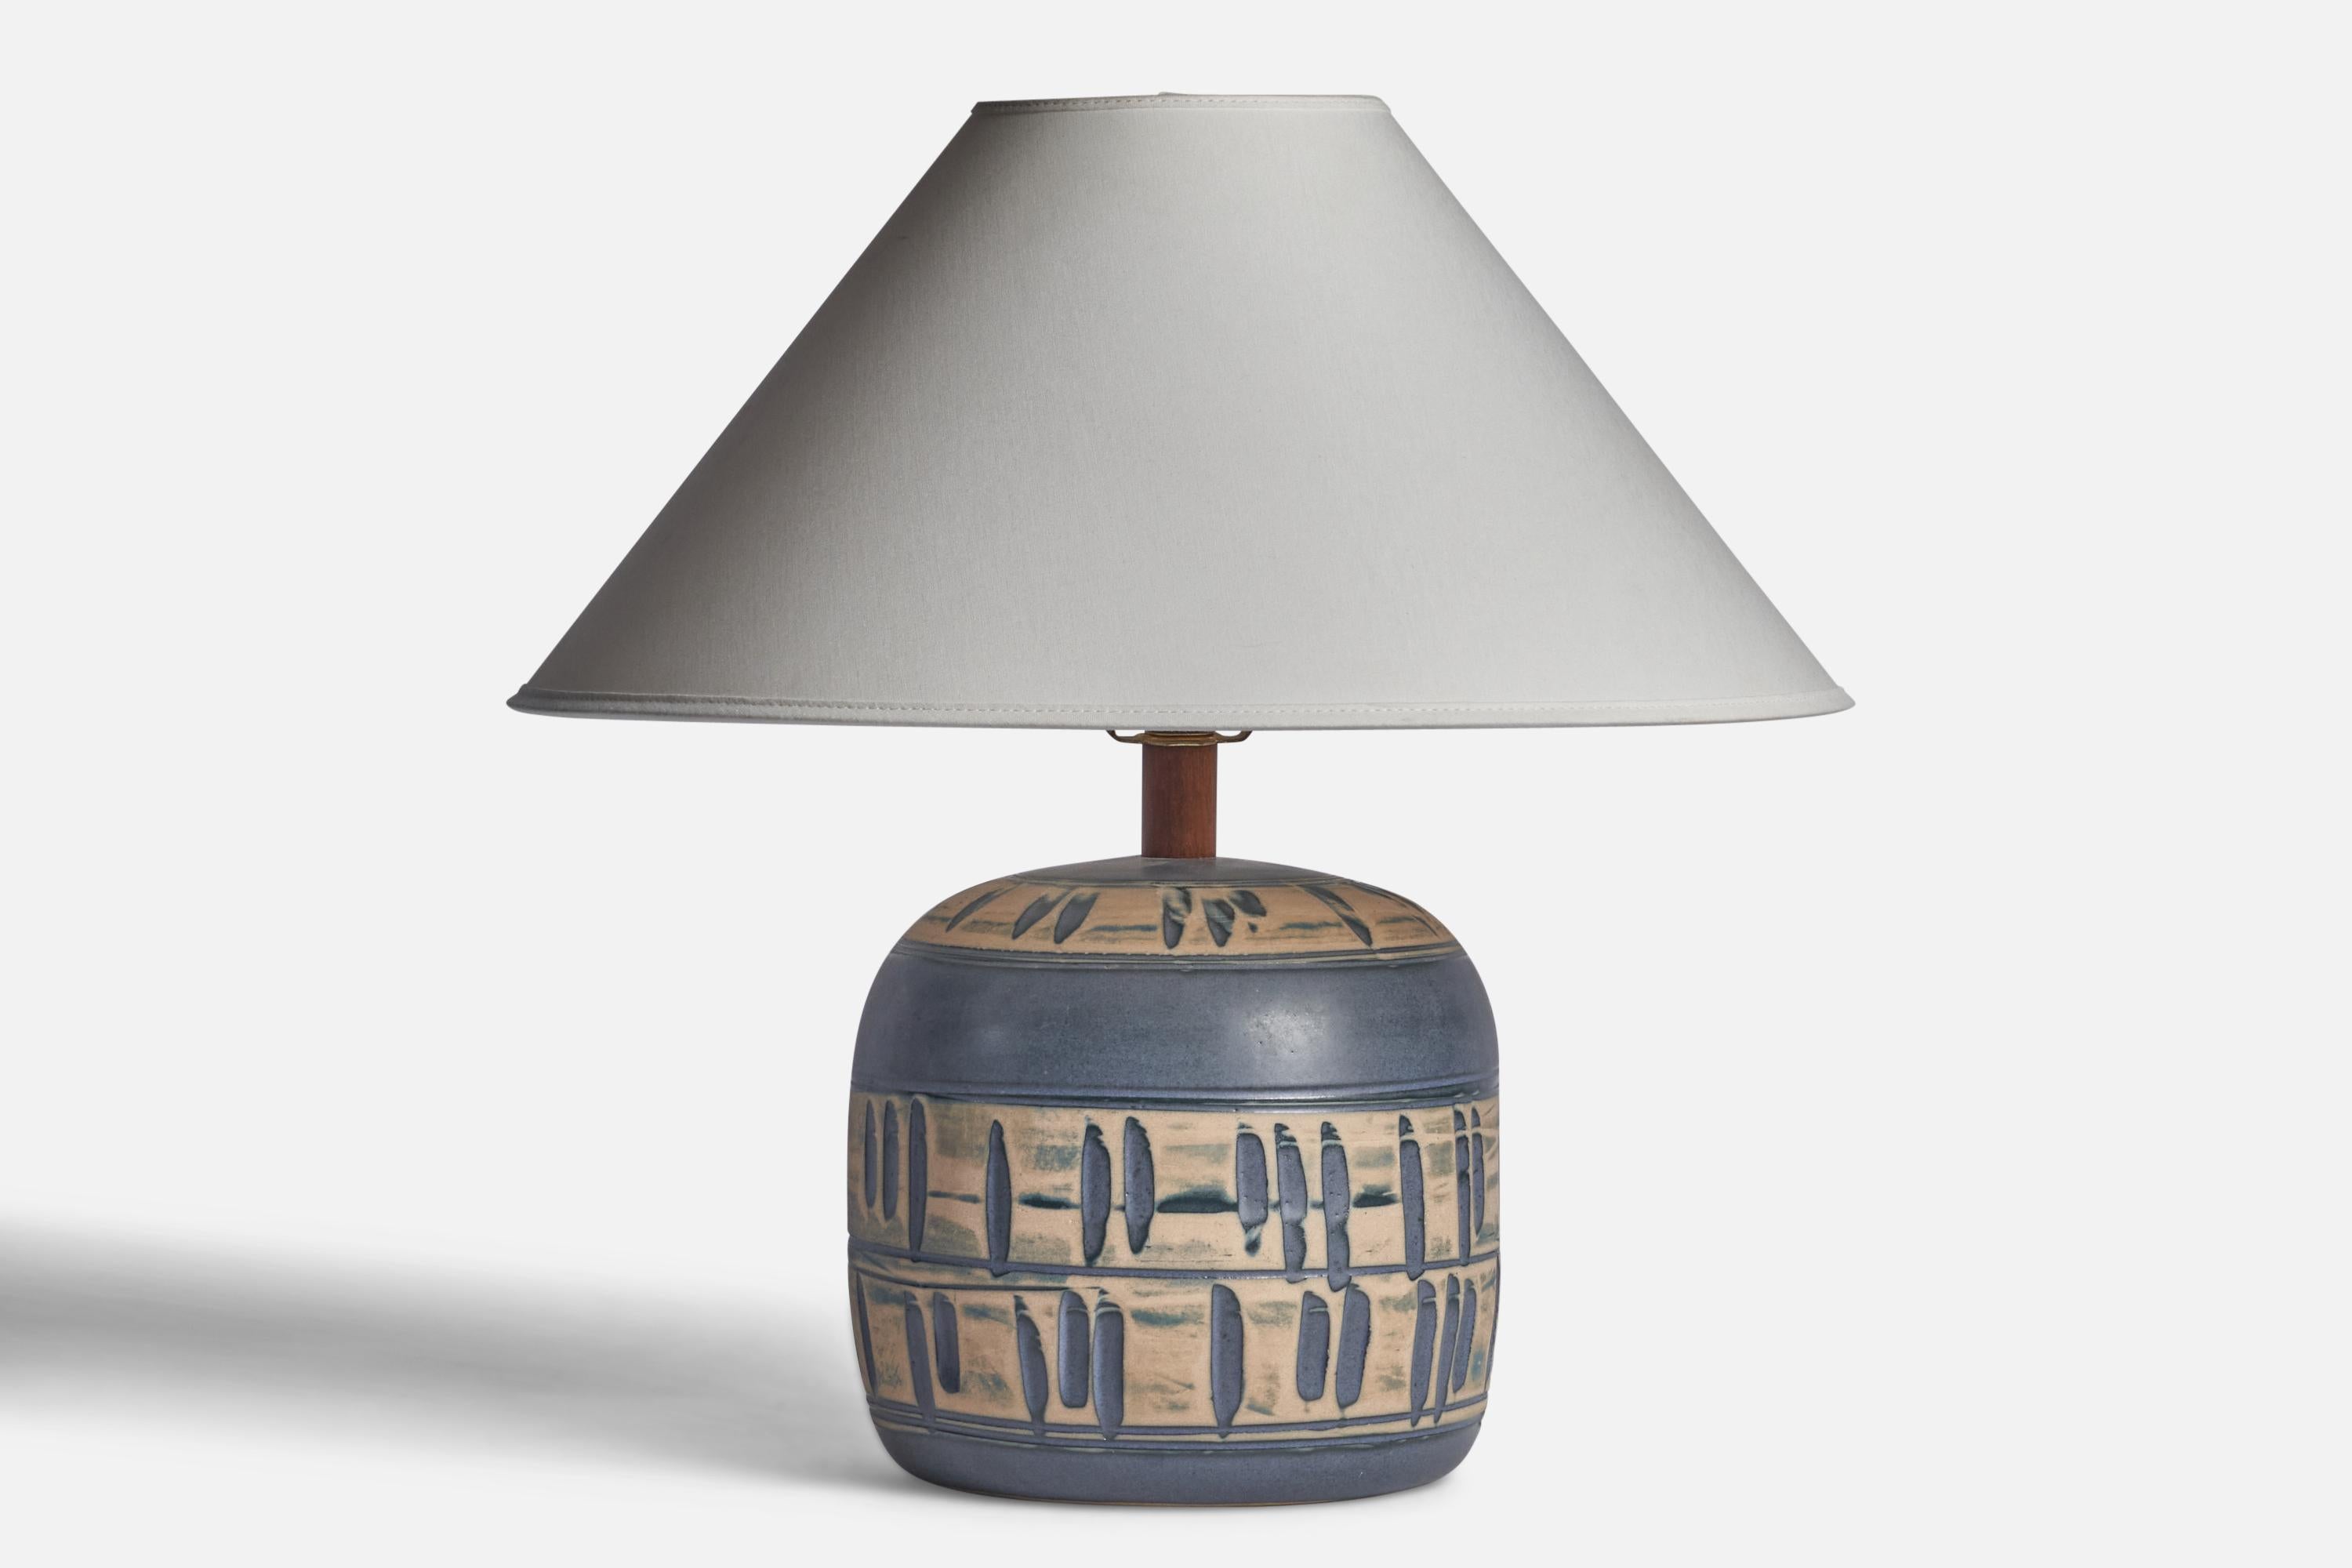 A blue and beige-glazed ceramic and walnut table lamp designed by Jane & Gordon Martz and produced by Marshall Studios, USA, 1960s.

Dimensions of Lamp (inches): 11.75” H x 7.5” Diameter
Dimensions of Shade (inches): 4.5” Top Diameter x 16” Bottom